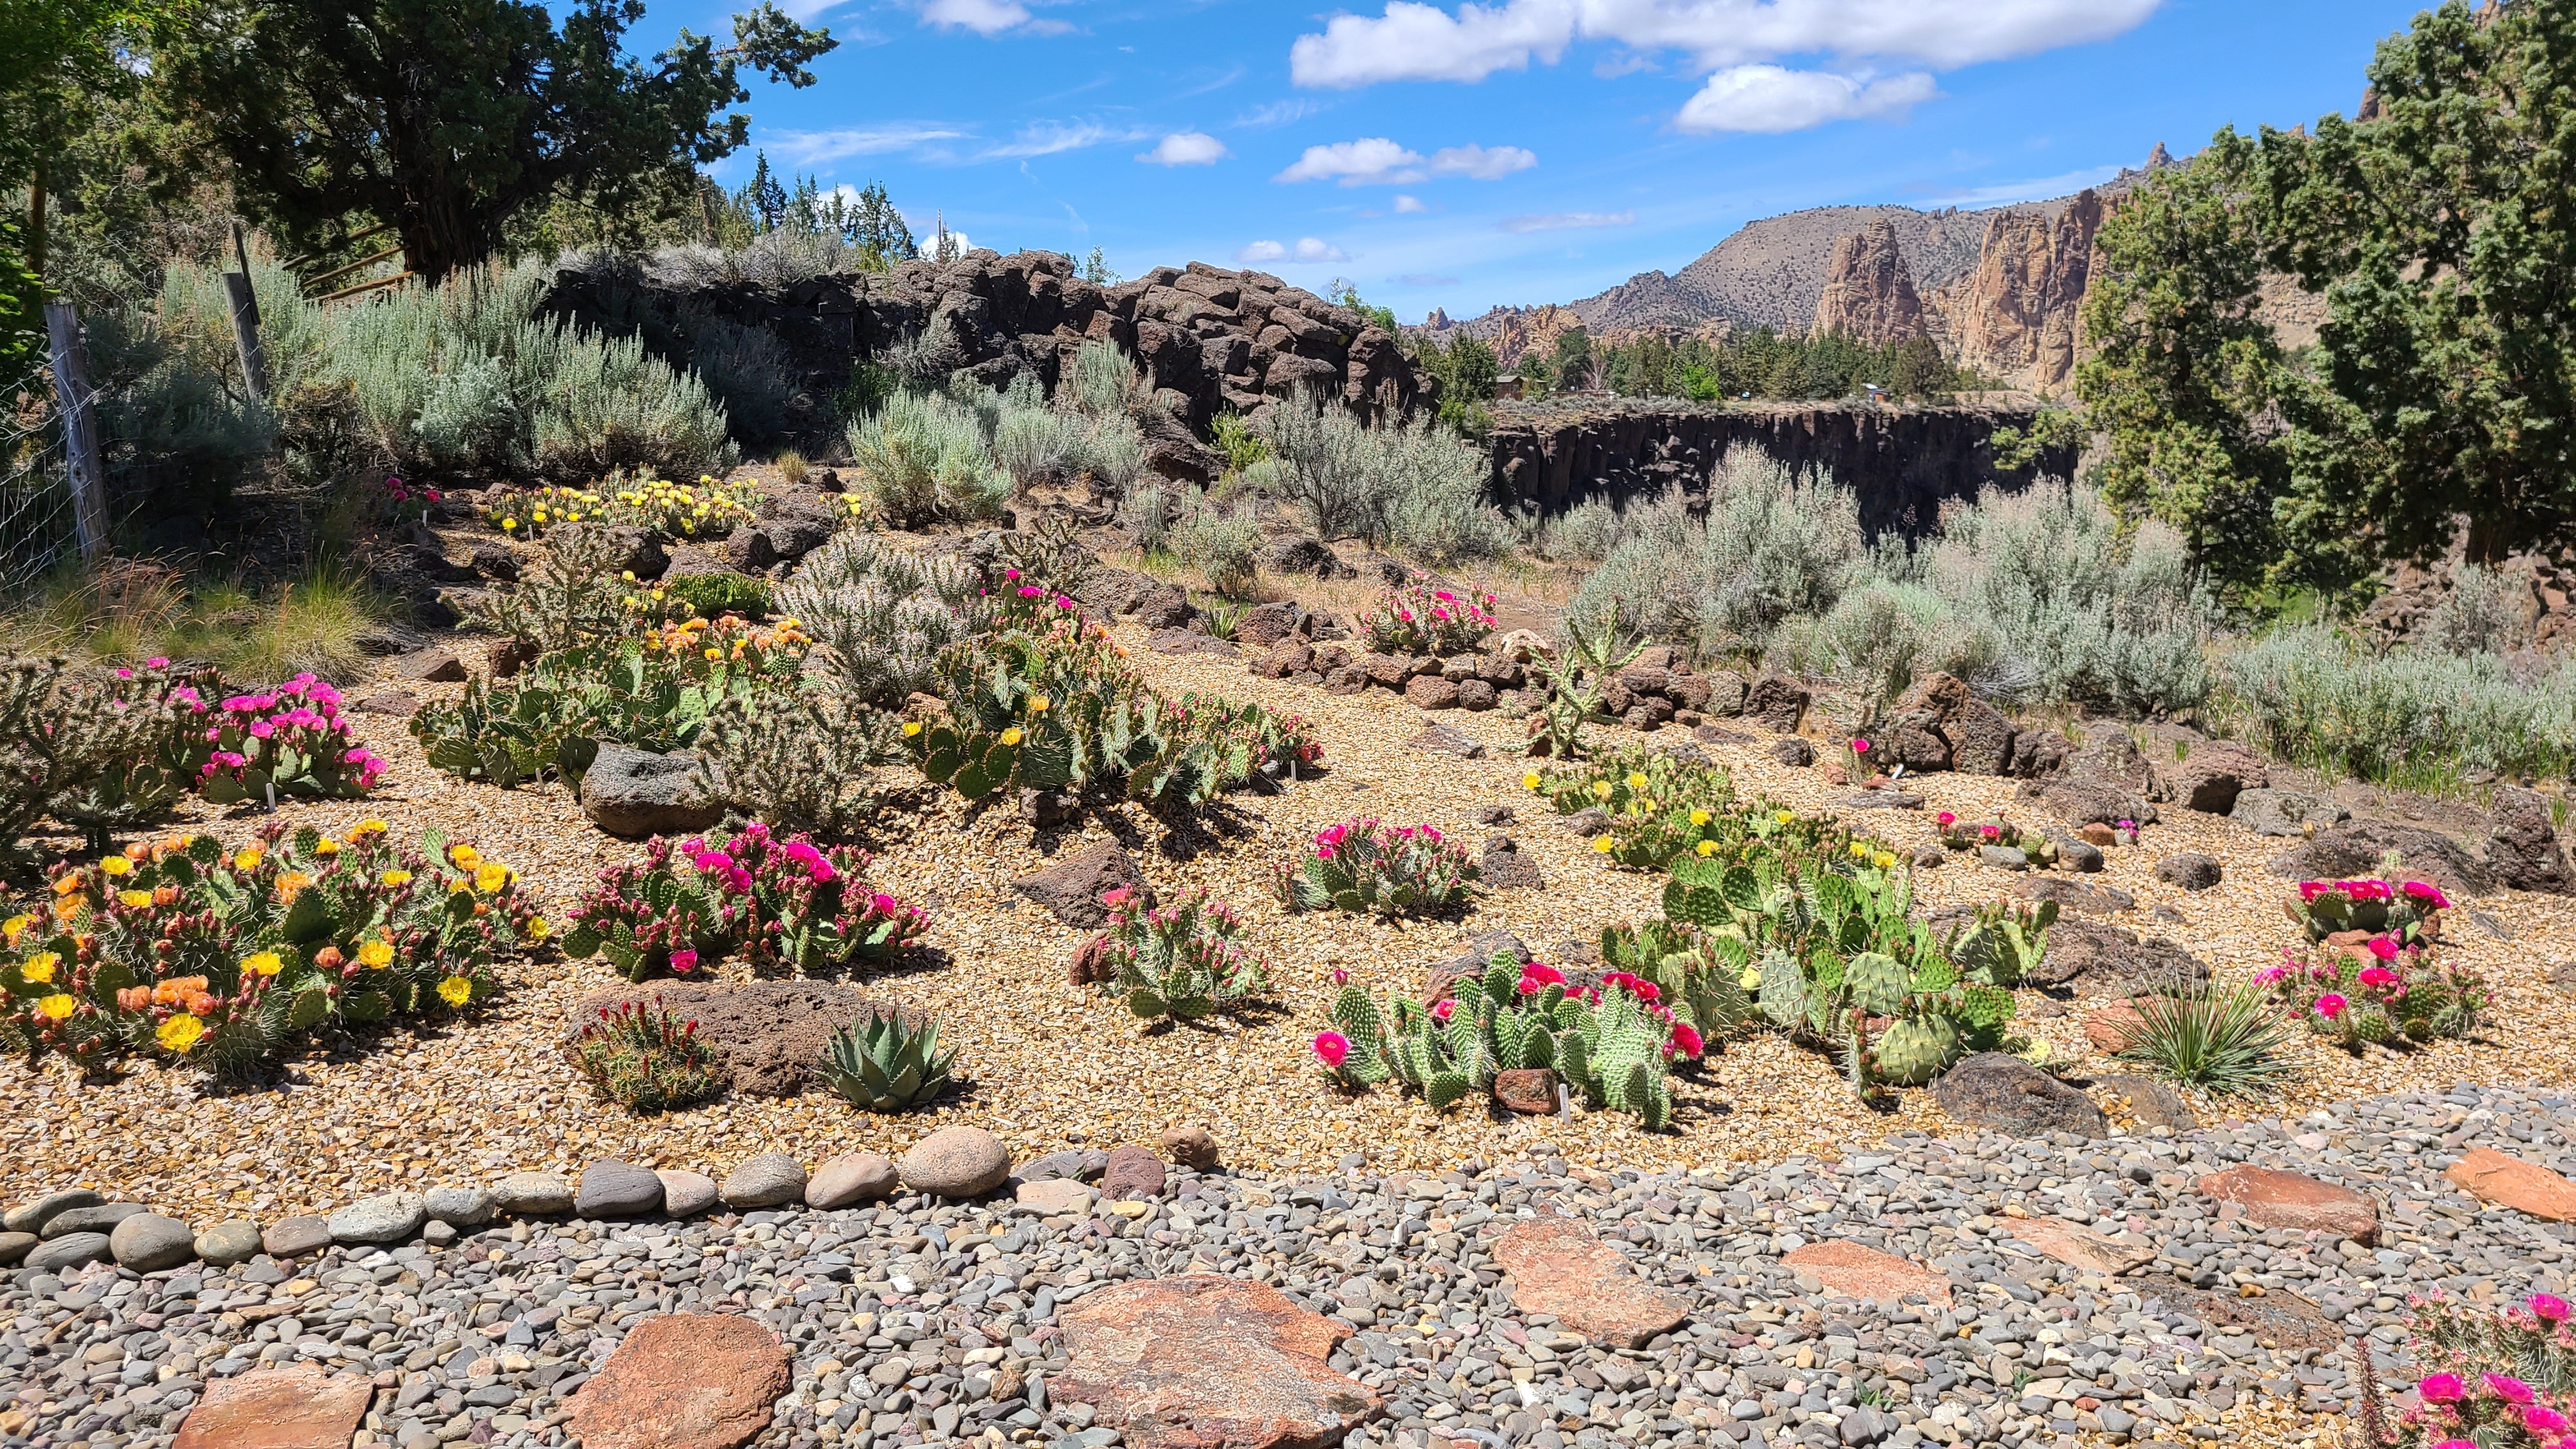 Cold Hardy Cacti with Smith Rock Cactus Company